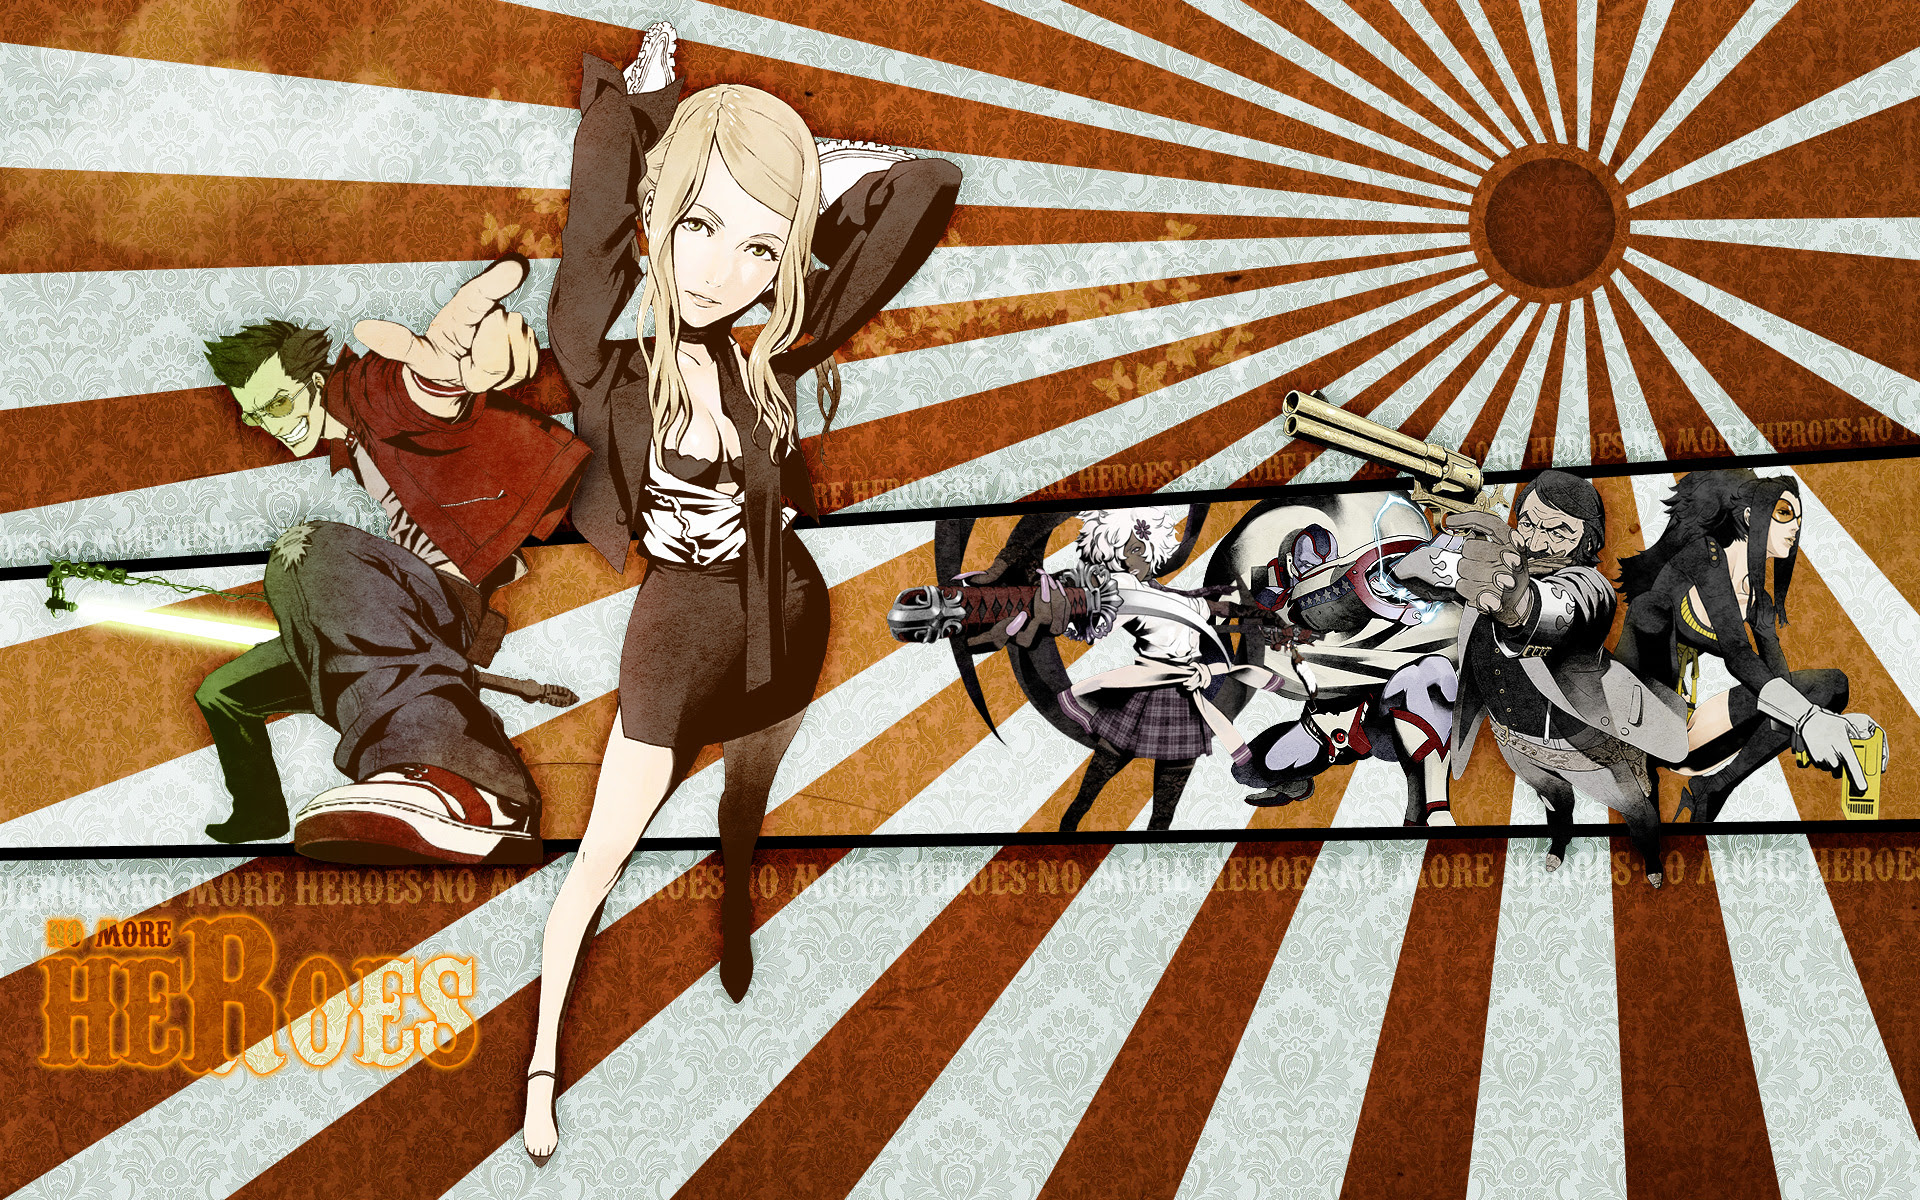 No More Heroes Wallpaper : Submitted by fnatt 1280x1024, 33 favorites ...